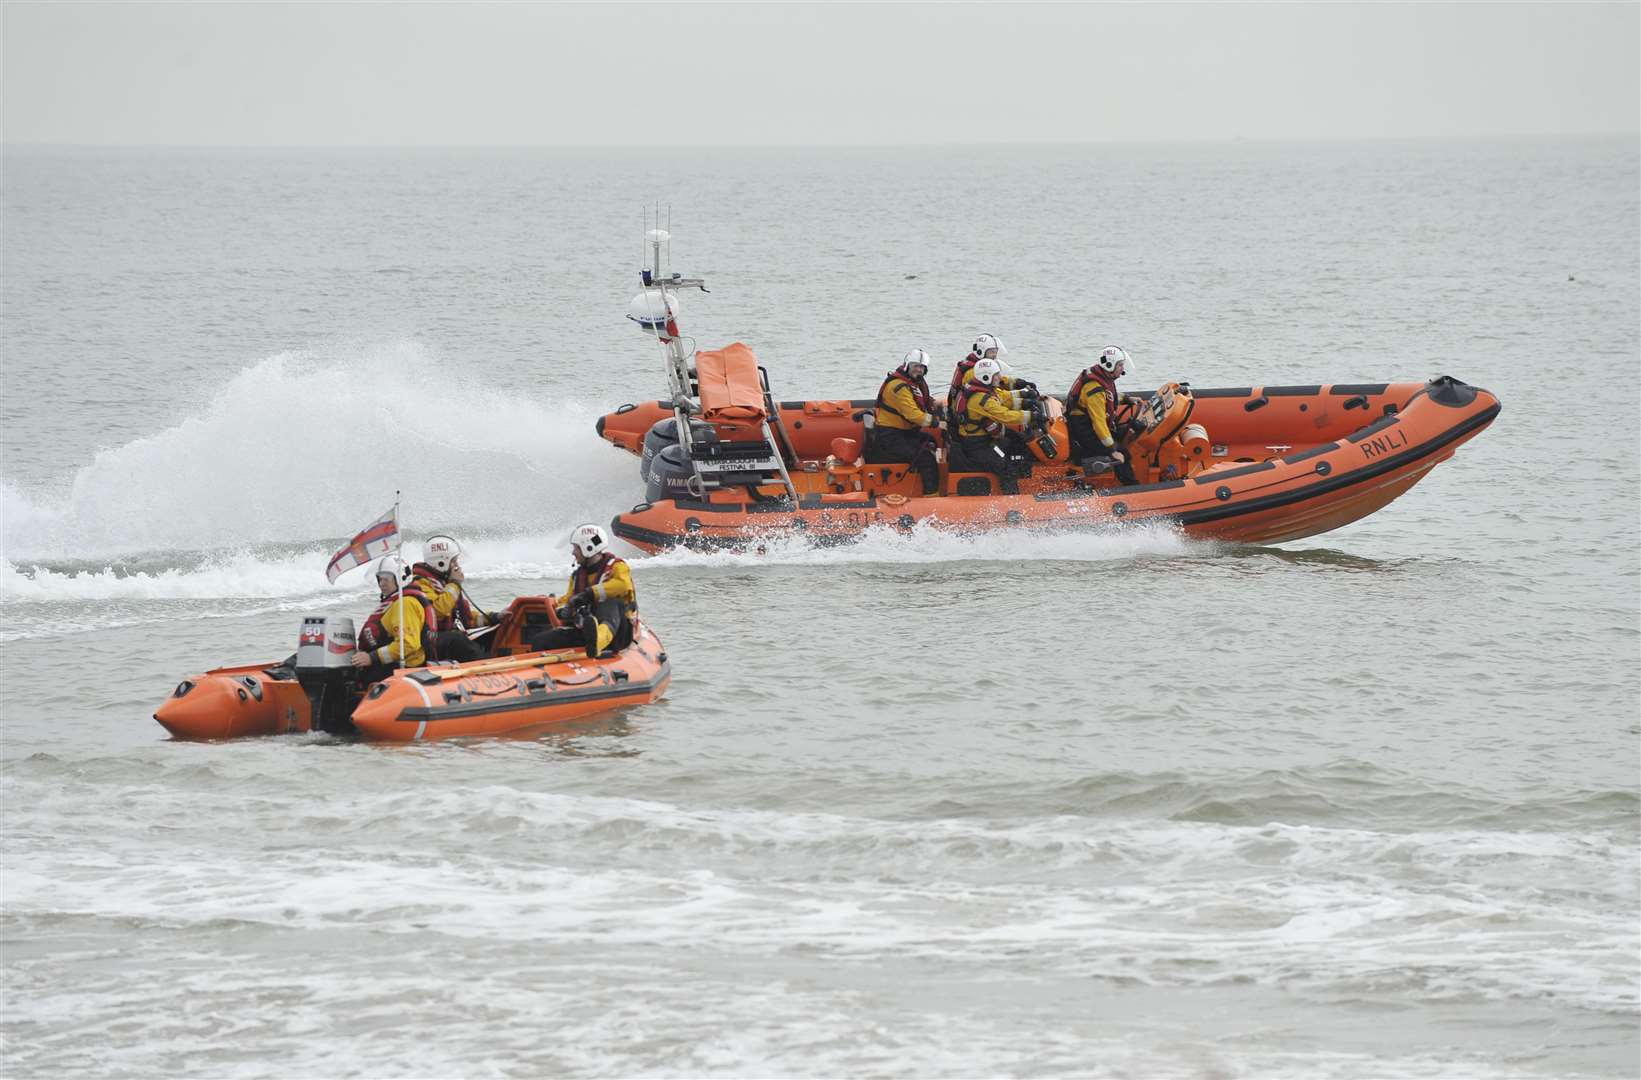 RNLI Walmer lifeboat on a training exercise